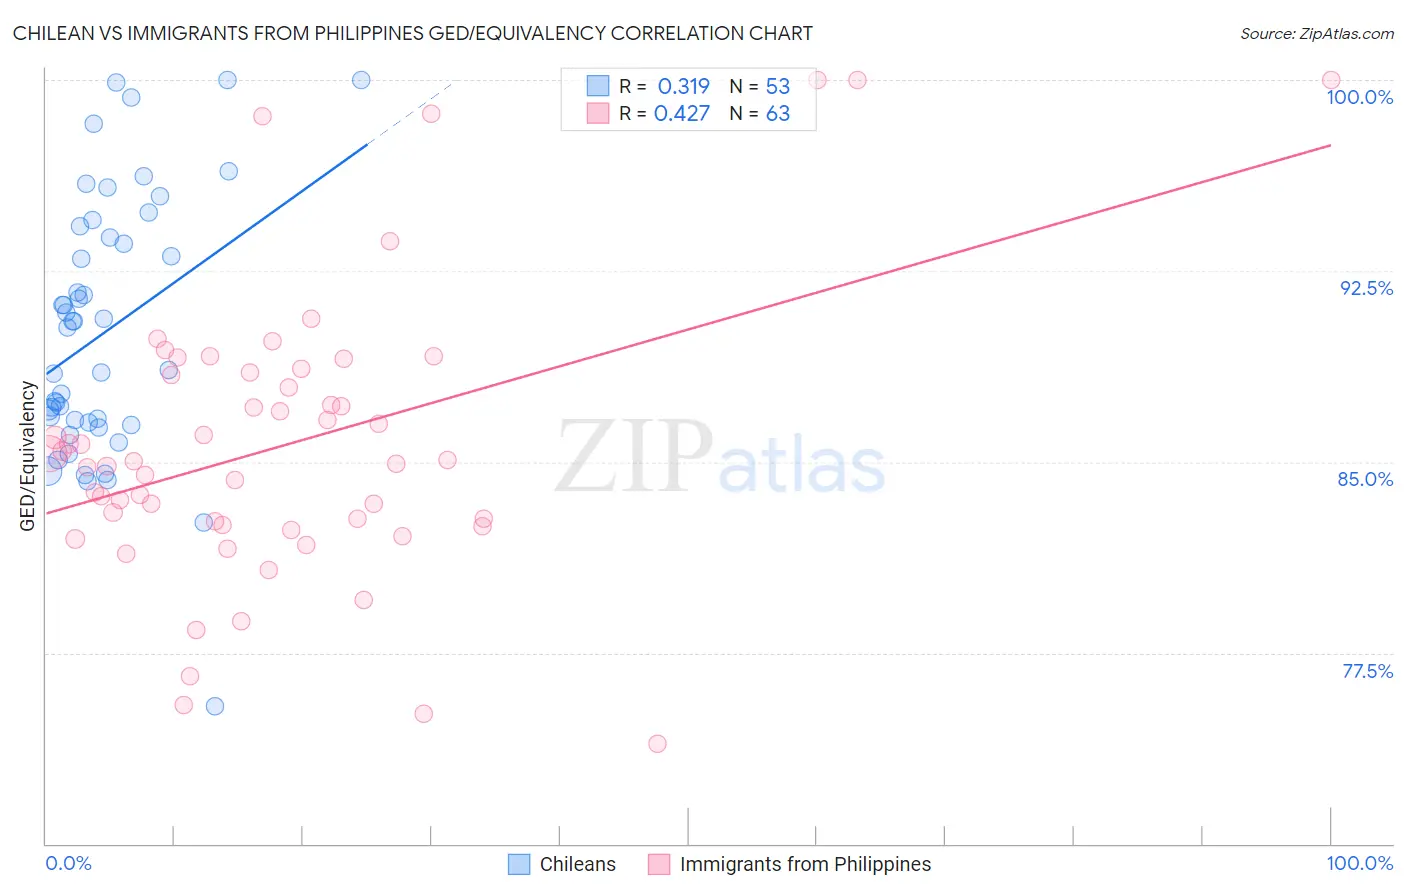 Chilean vs Immigrants from Philippines GED/Equivalency